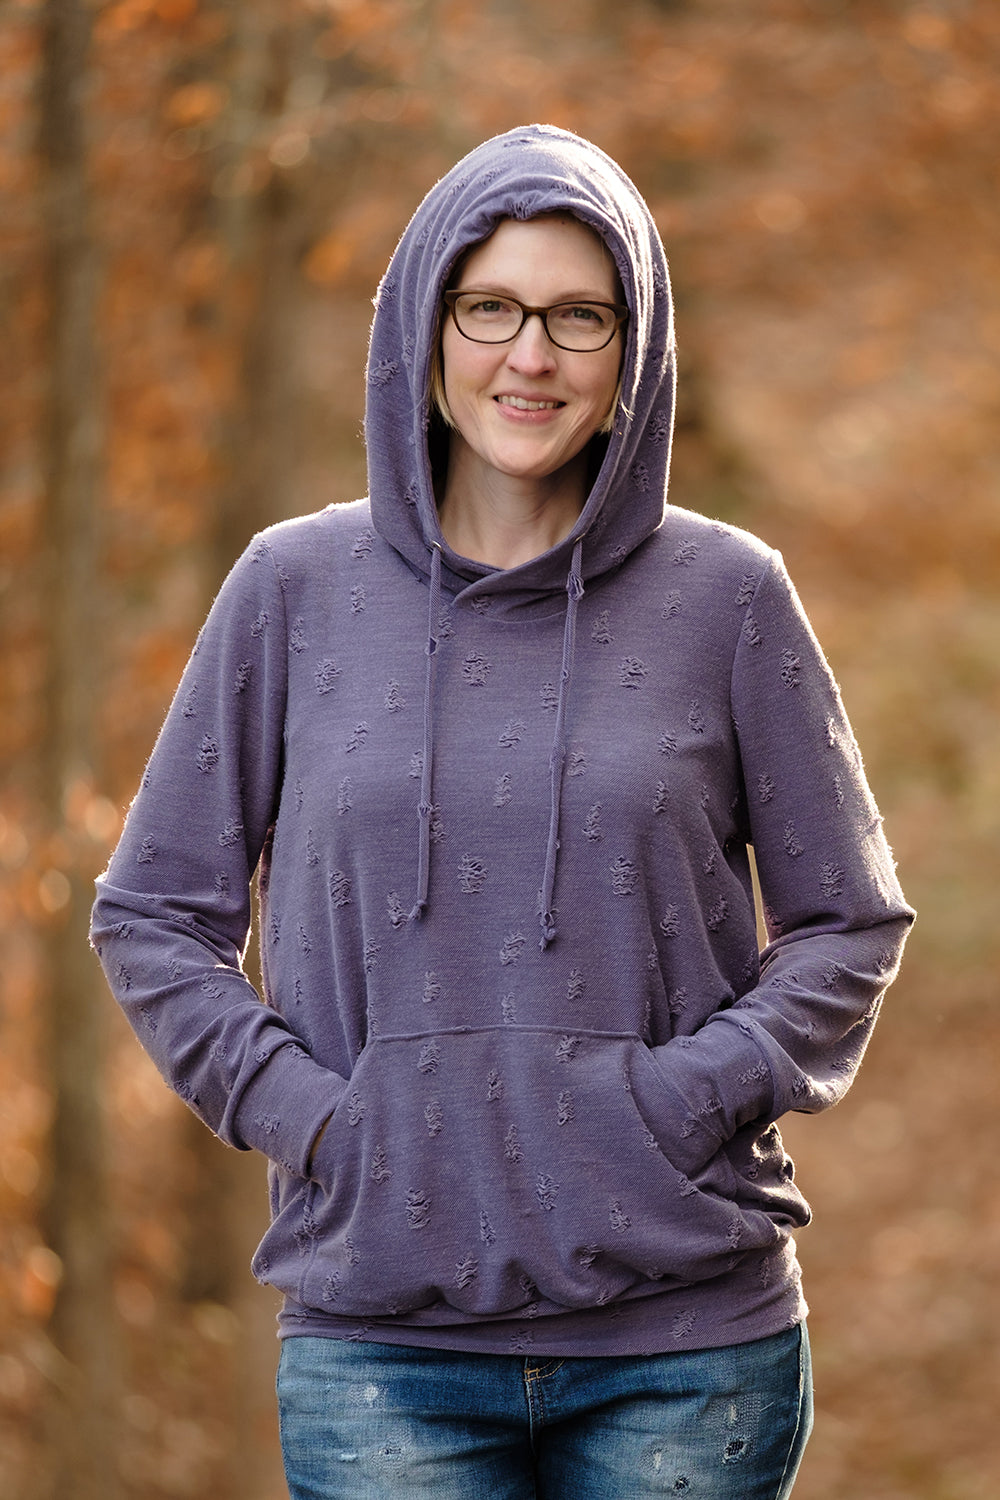 The Melissa Sweatshirt in misses size. Features a hood, kangaroo pocket, and banded hem. 